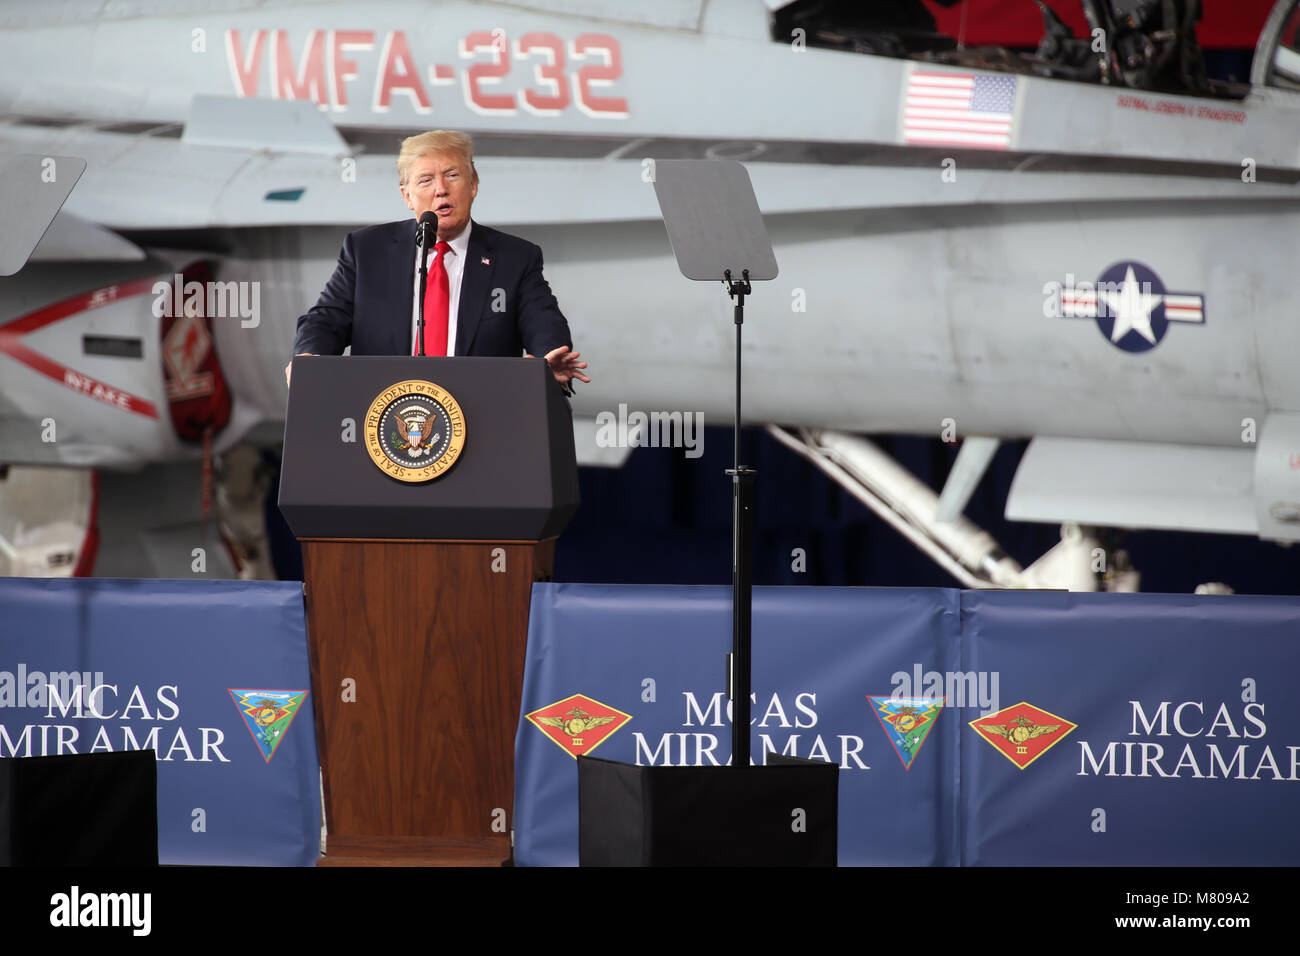 U.S President Donald Trump addresses troops during a stop at Marine Corps Air Station Miramar March 13, 2018 in Miramar, California. Trump made a quick day trip to California, his first since becoming president. Stock Photo